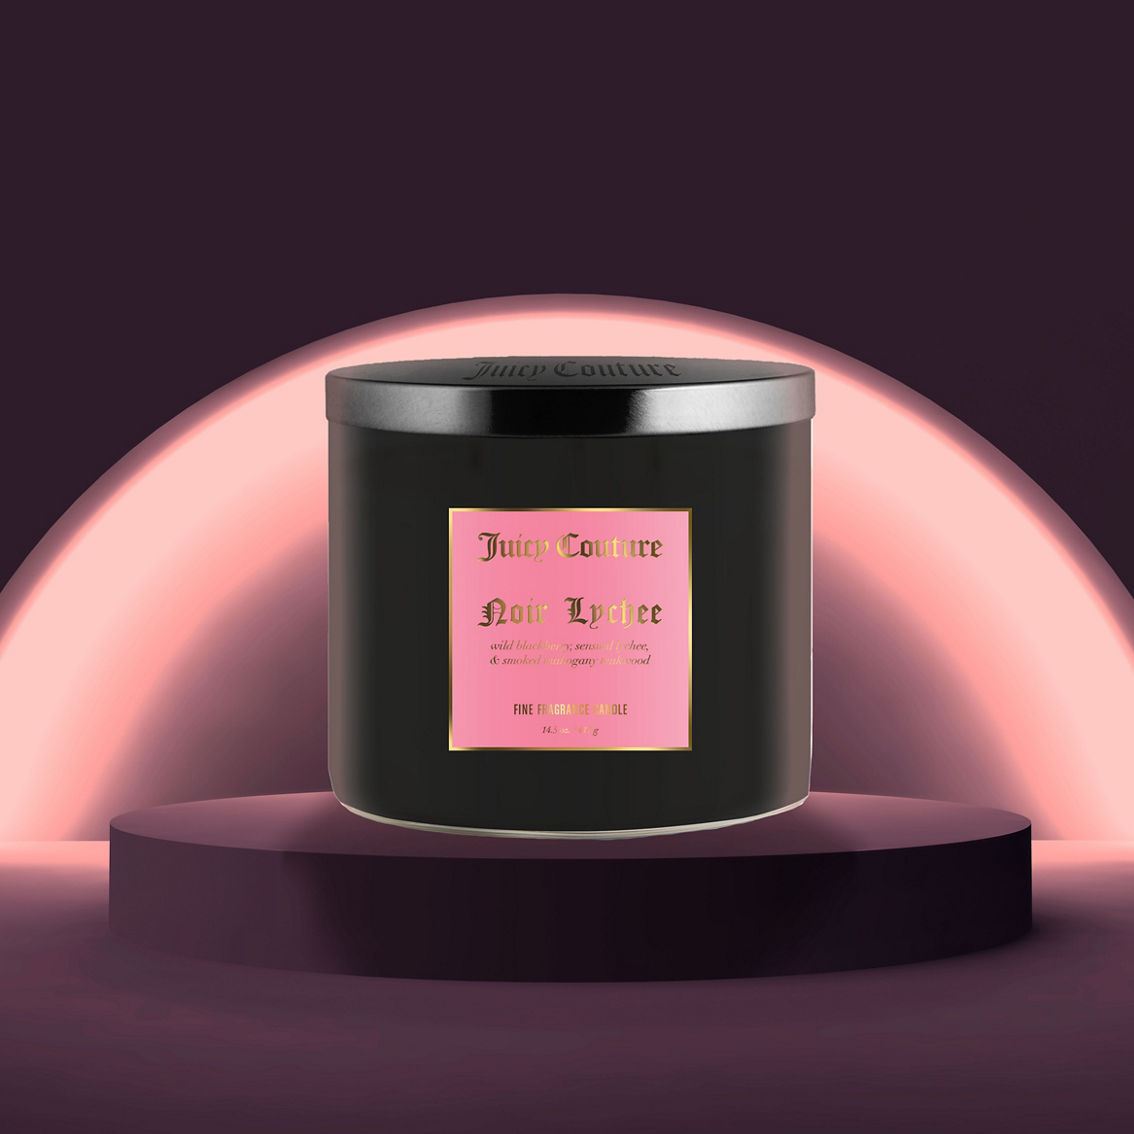 Juicy Couture Noir Lychee Candle - Image 2 of 3